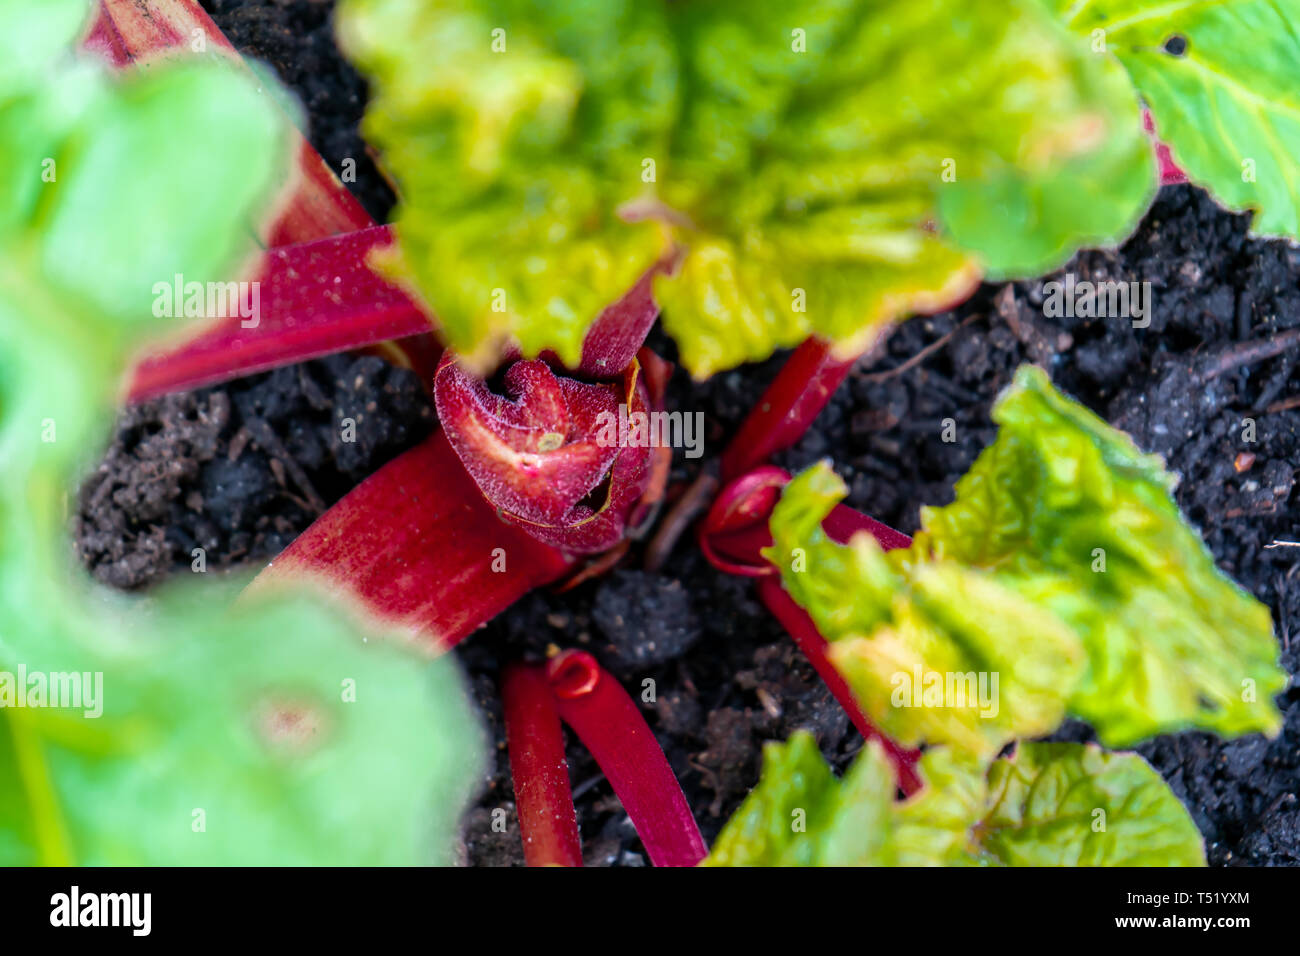 Top view, close up of red rhubarb crown growing stalks in early spring, in a vegetable garden. Example of perennial edible plant containing oxalic aci Stock Photo